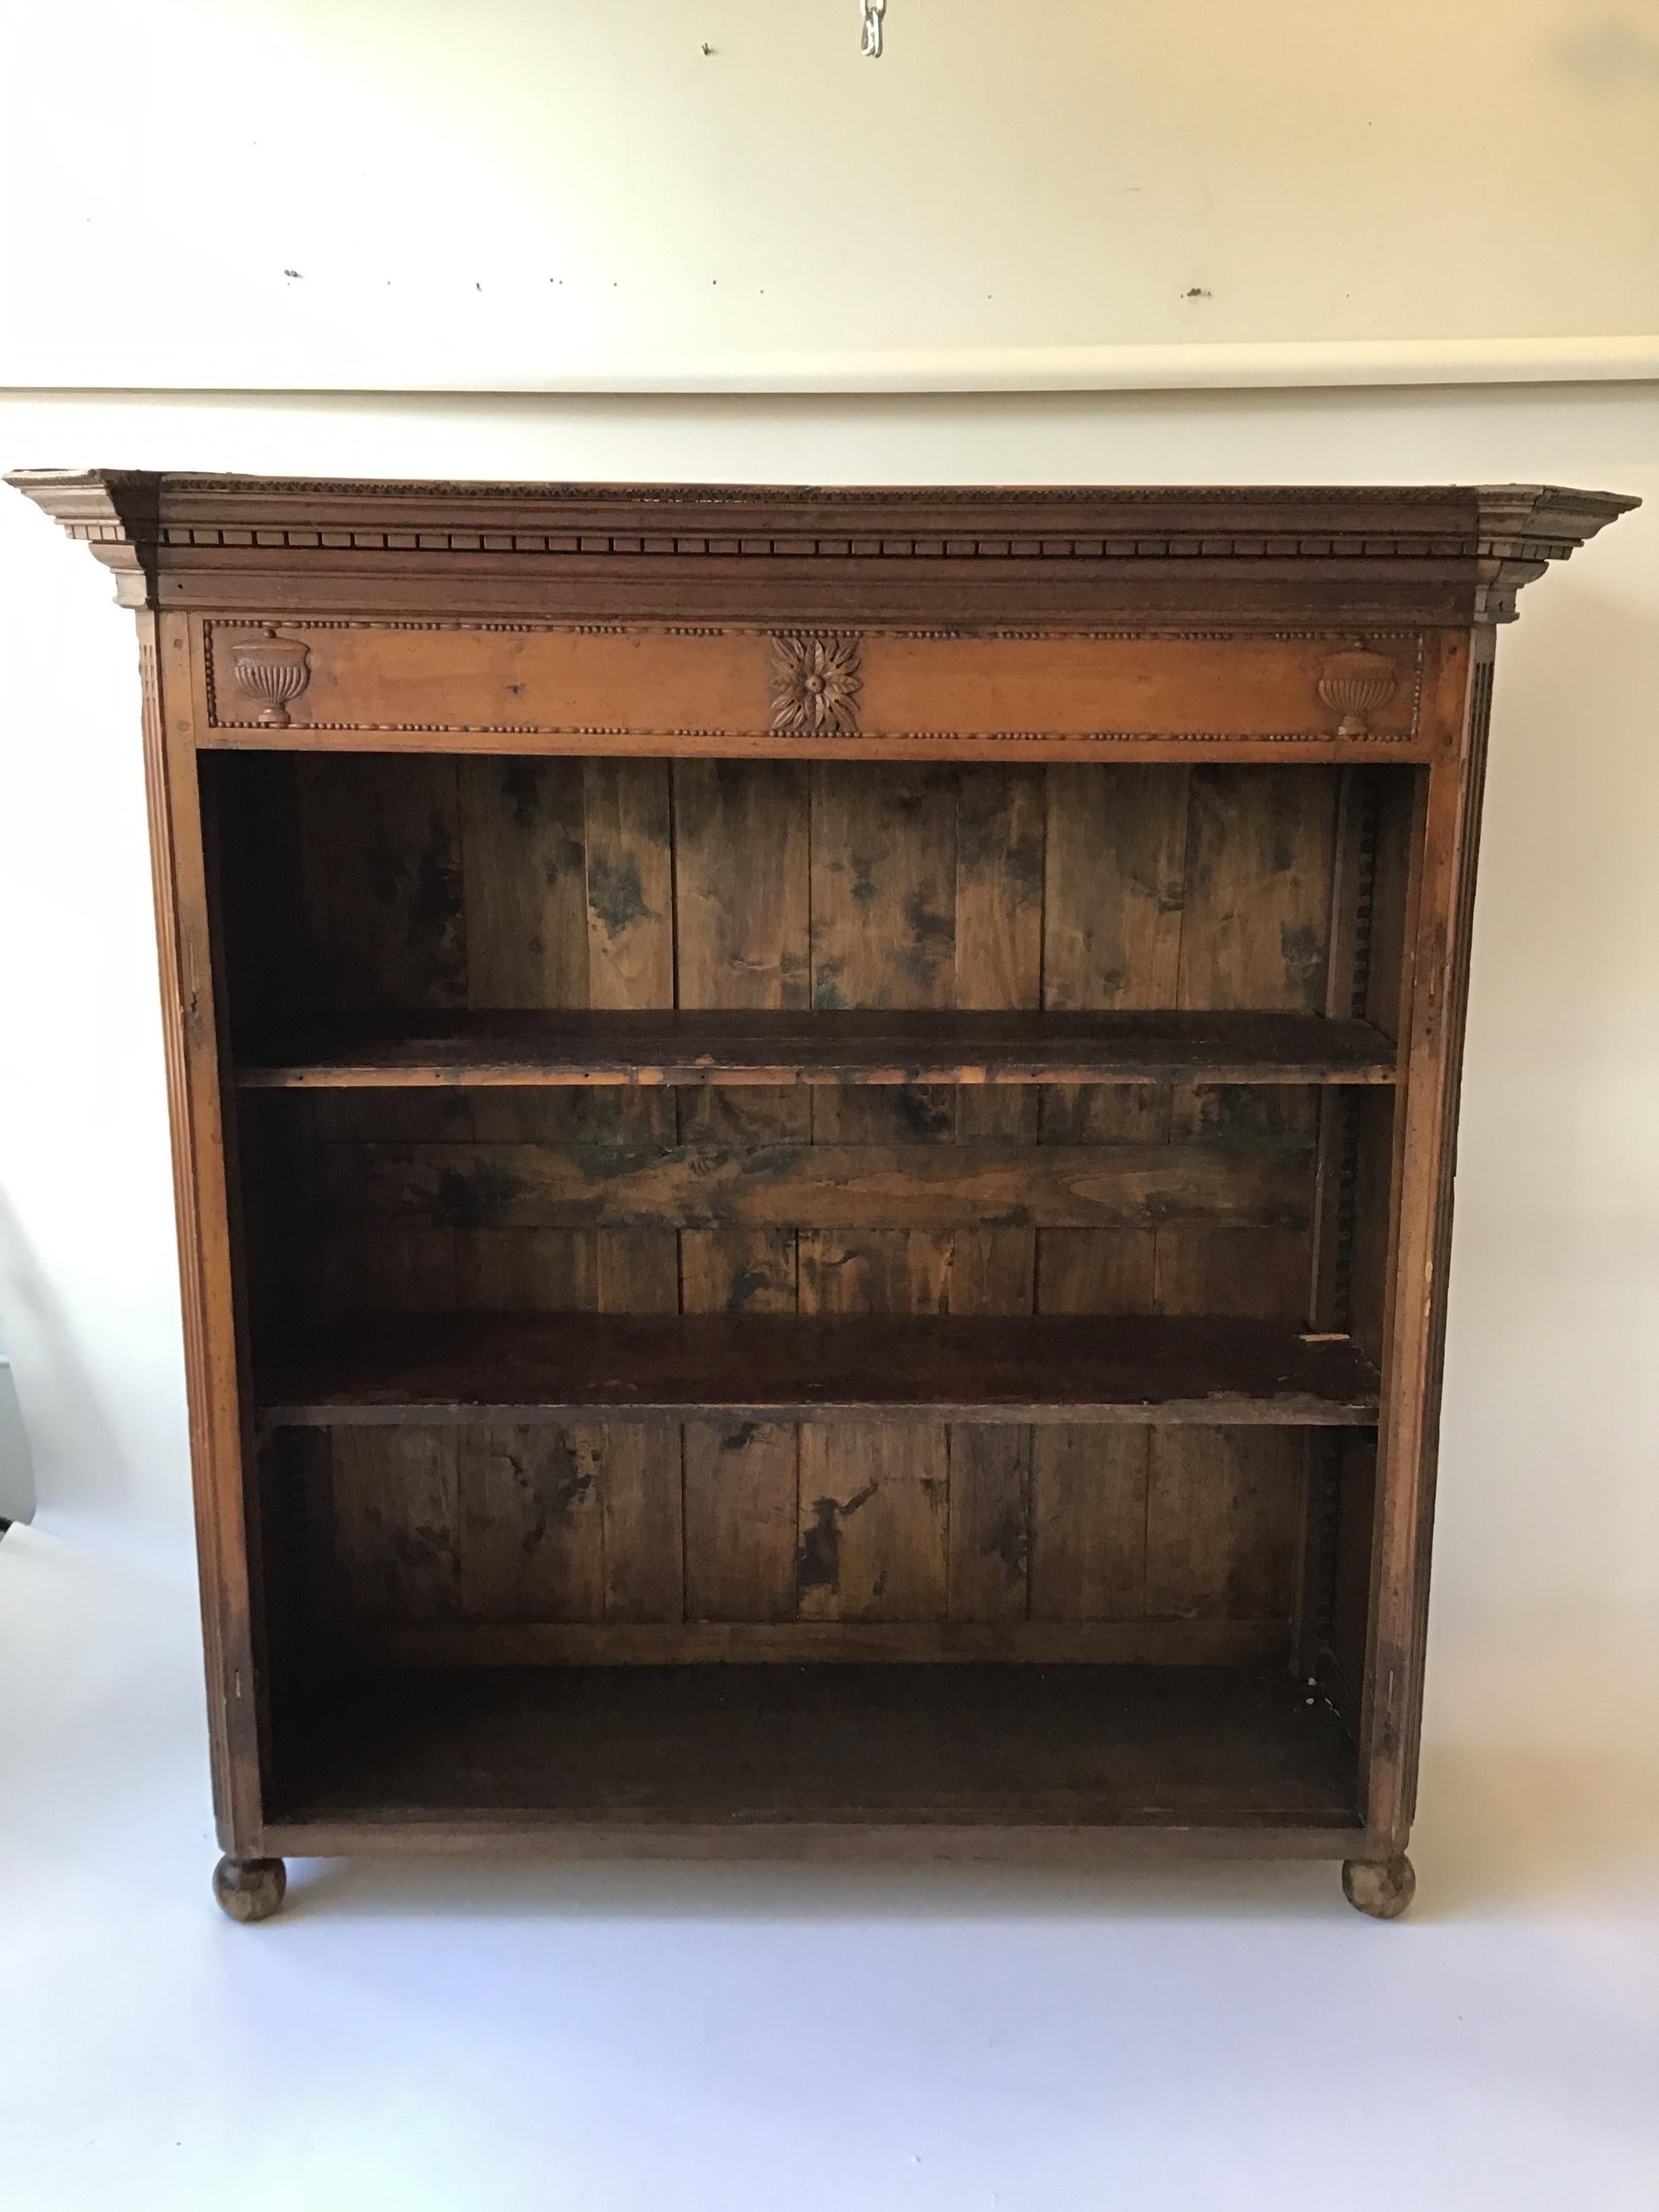 1780s French bookcase. This piece once had doors, but they’re long gone. Could have been the top of a sideboard.